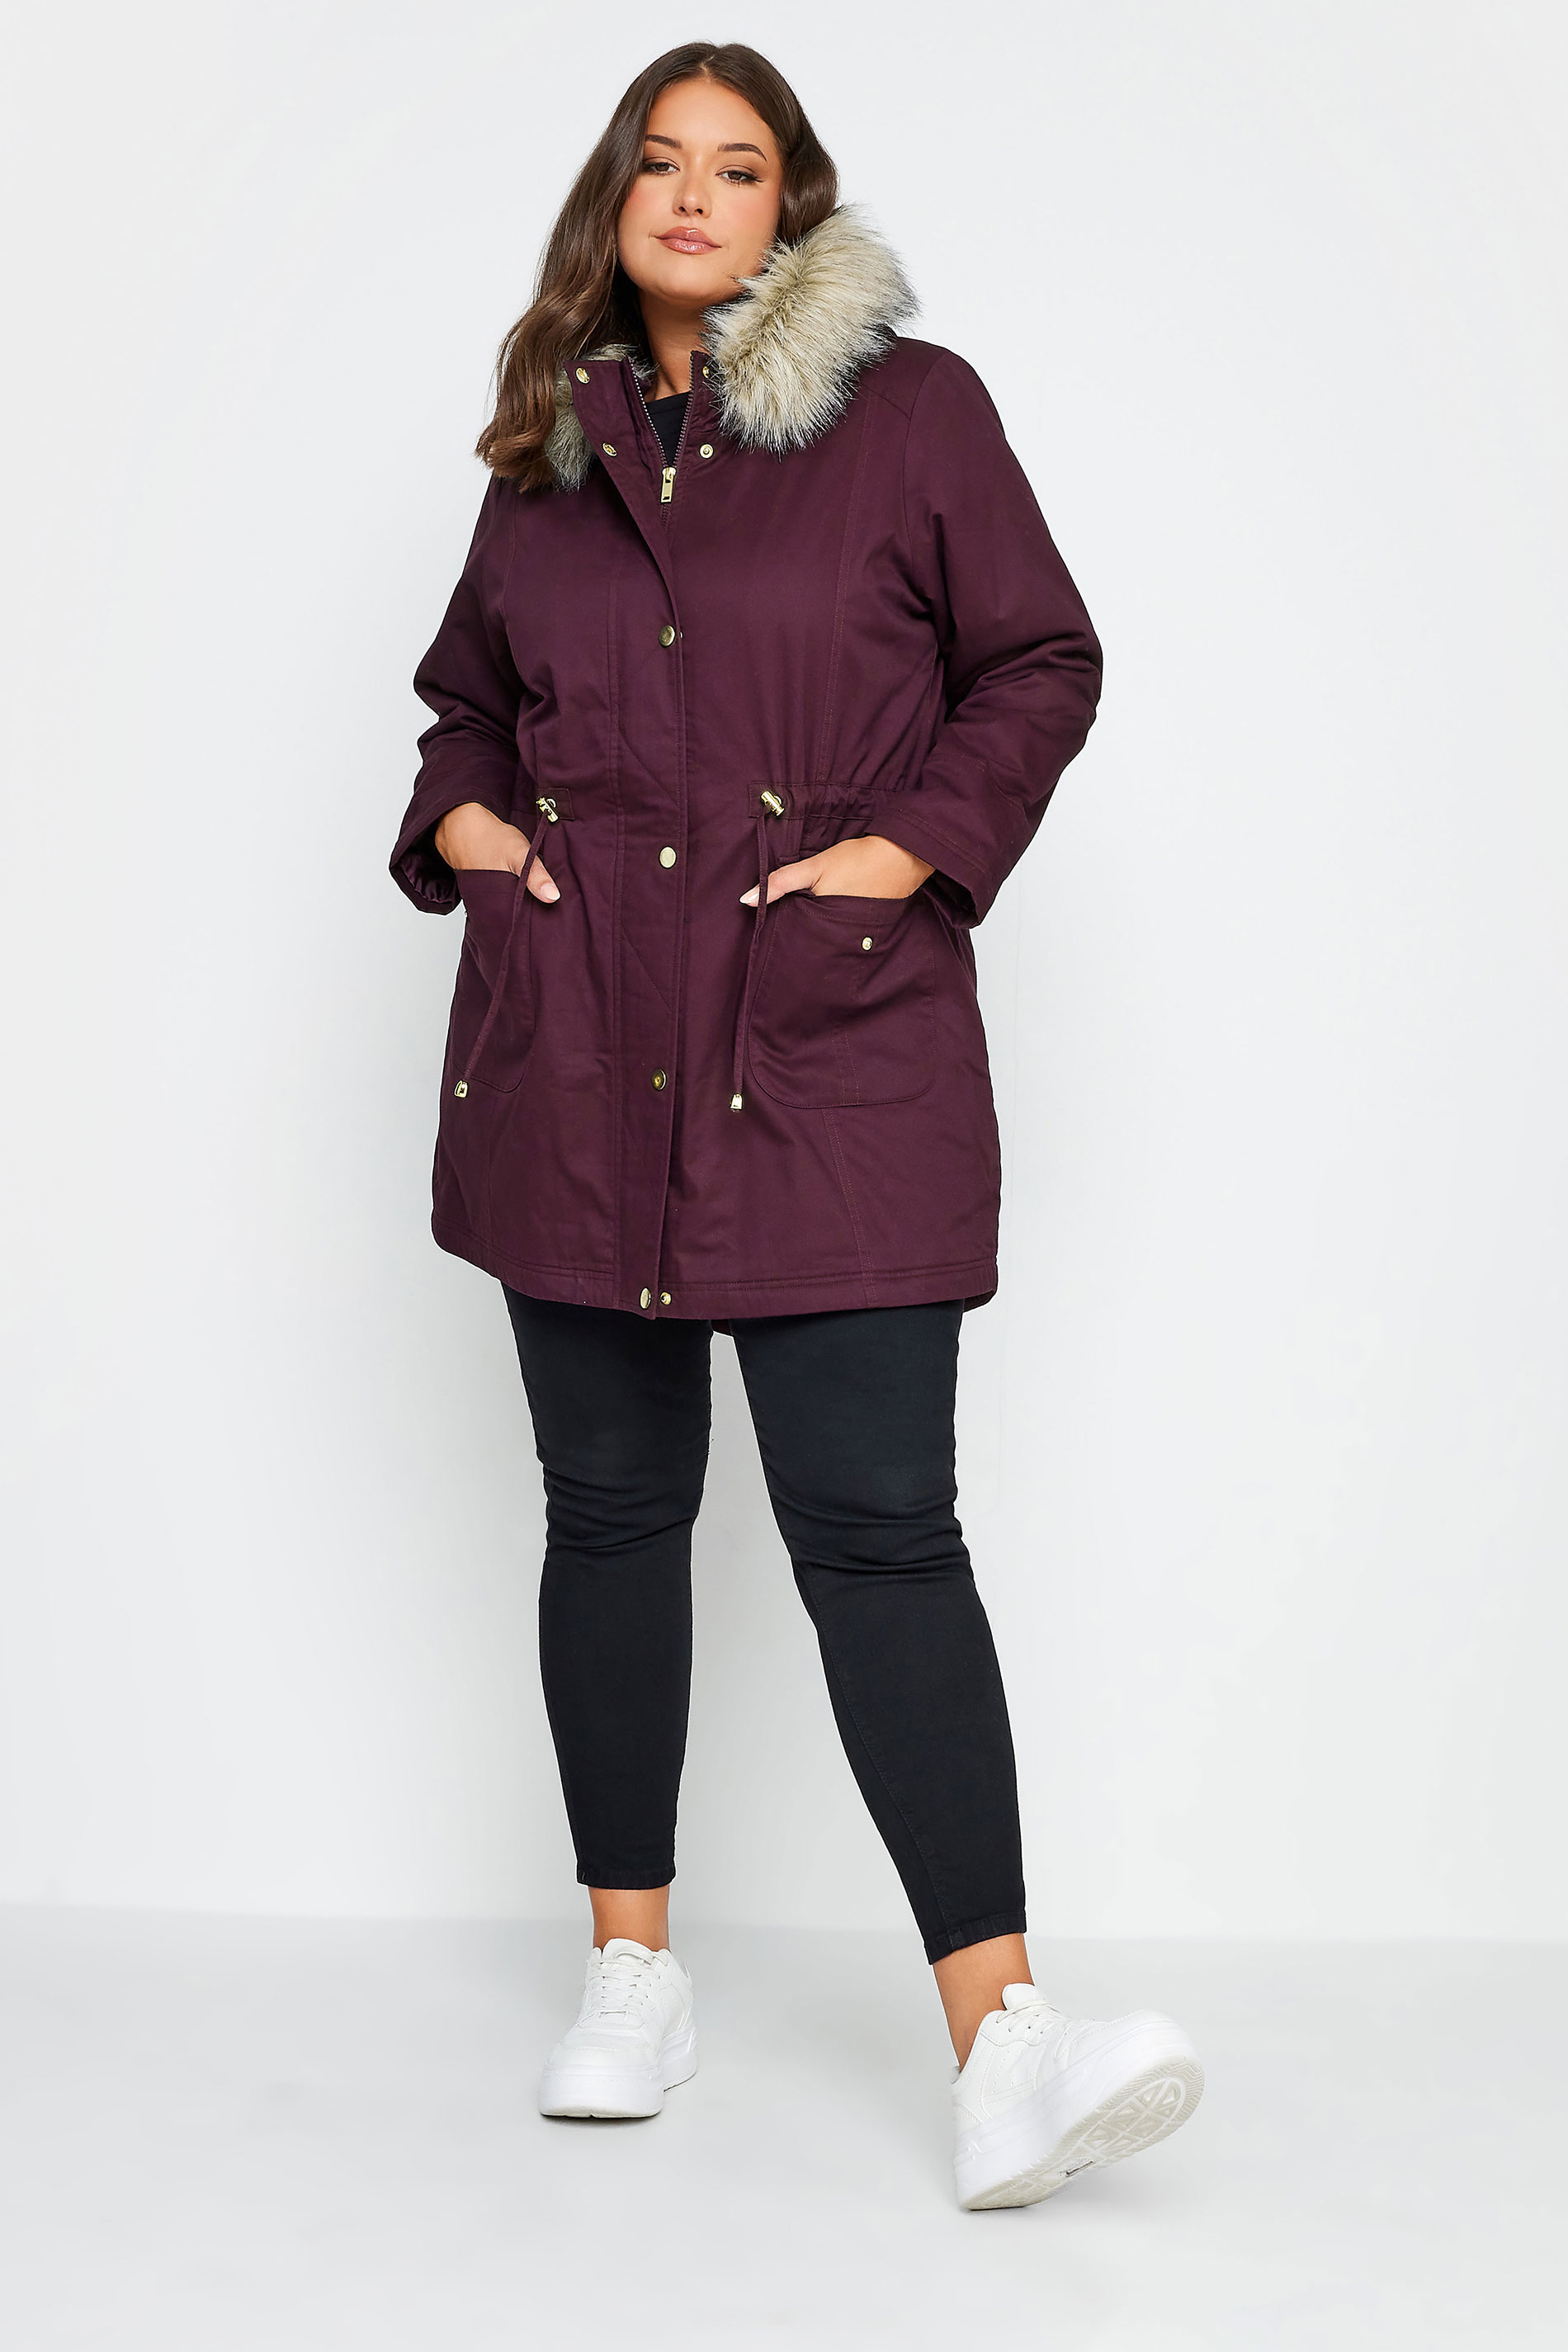 YOURS Curve Plus Size Burgundy Red Faux Fur Parka Coat | Yours Clothing  2